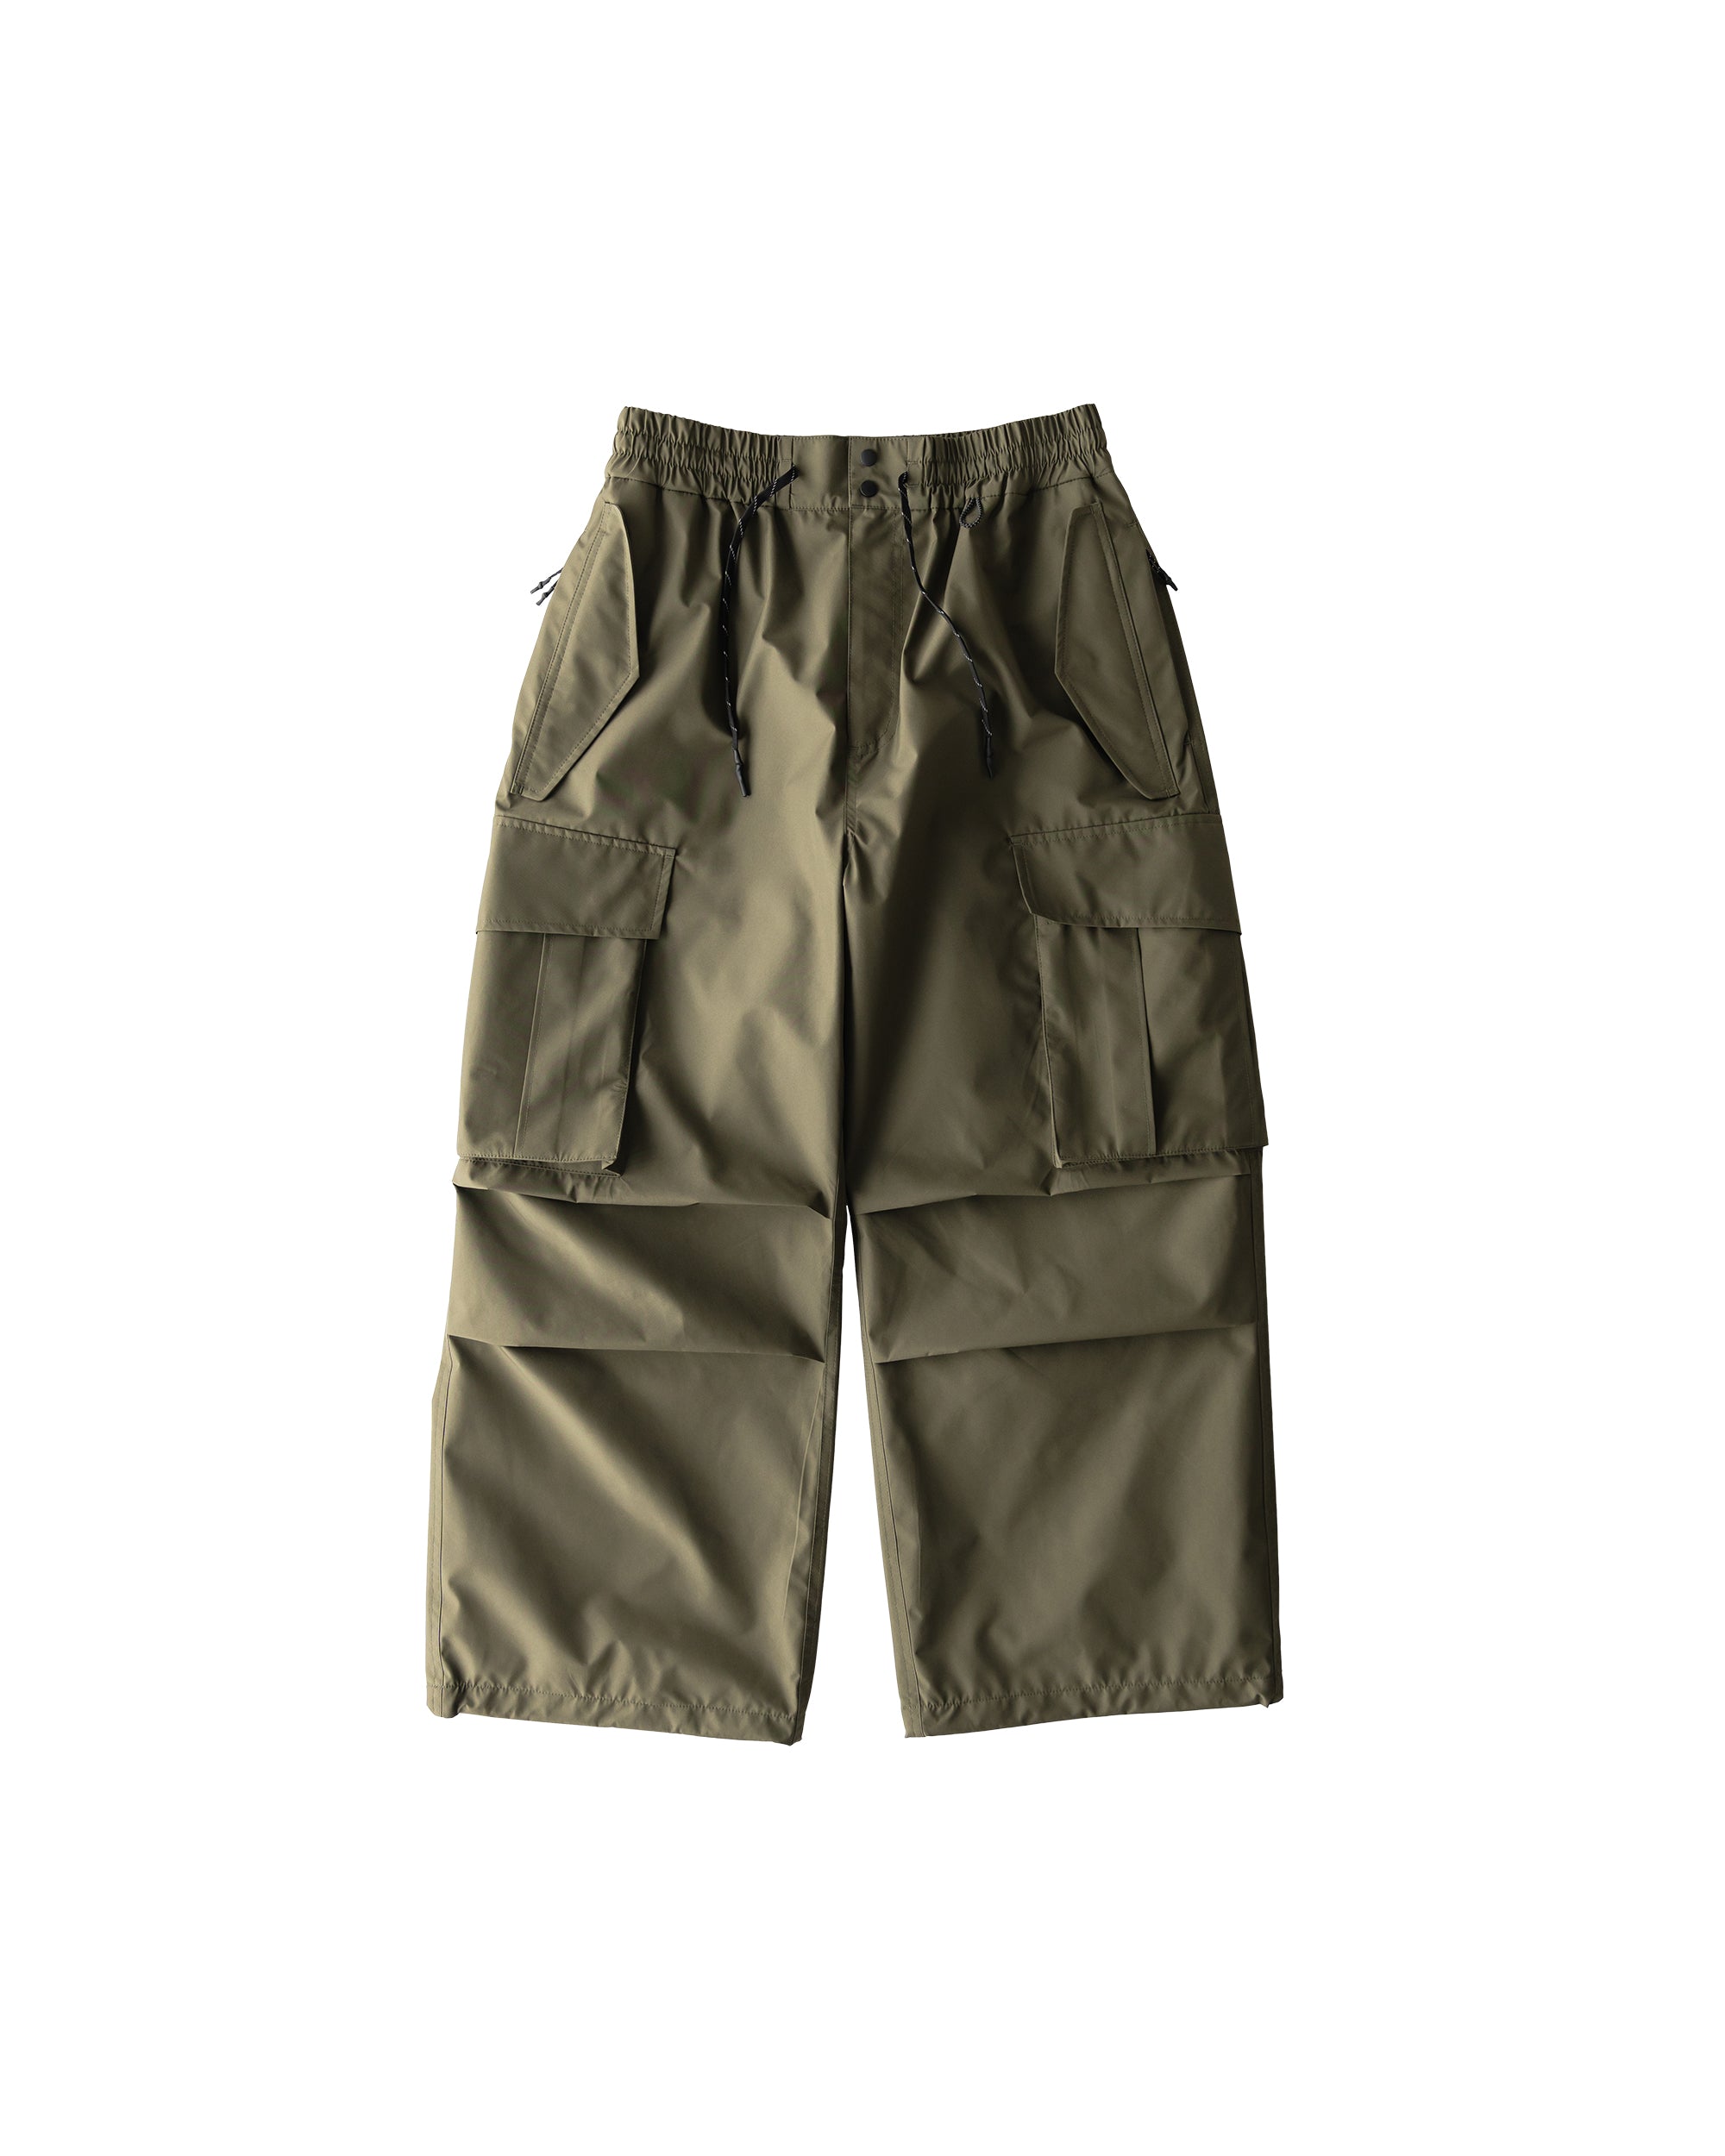 【2.23 fri 20:00- In stock】+phenix WINDSTOPPER® by GORE-TEX LABS CITY MILITARY PANTS